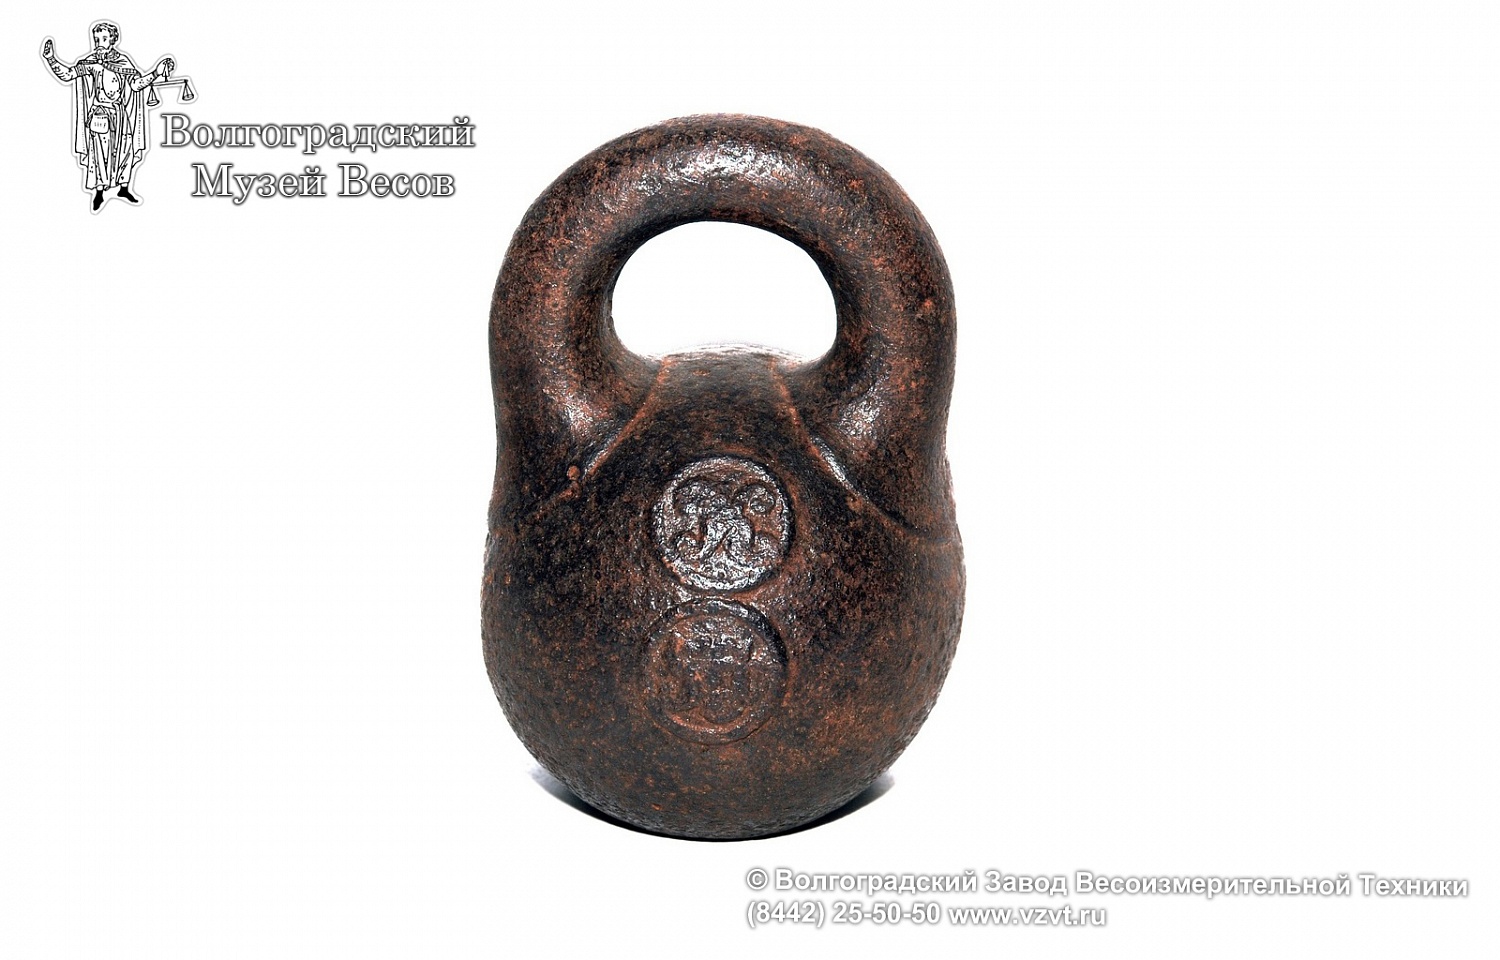 Cast iron trade weight of 5 pounds nominal value. Russia, the late 19th – the early 20th centuries